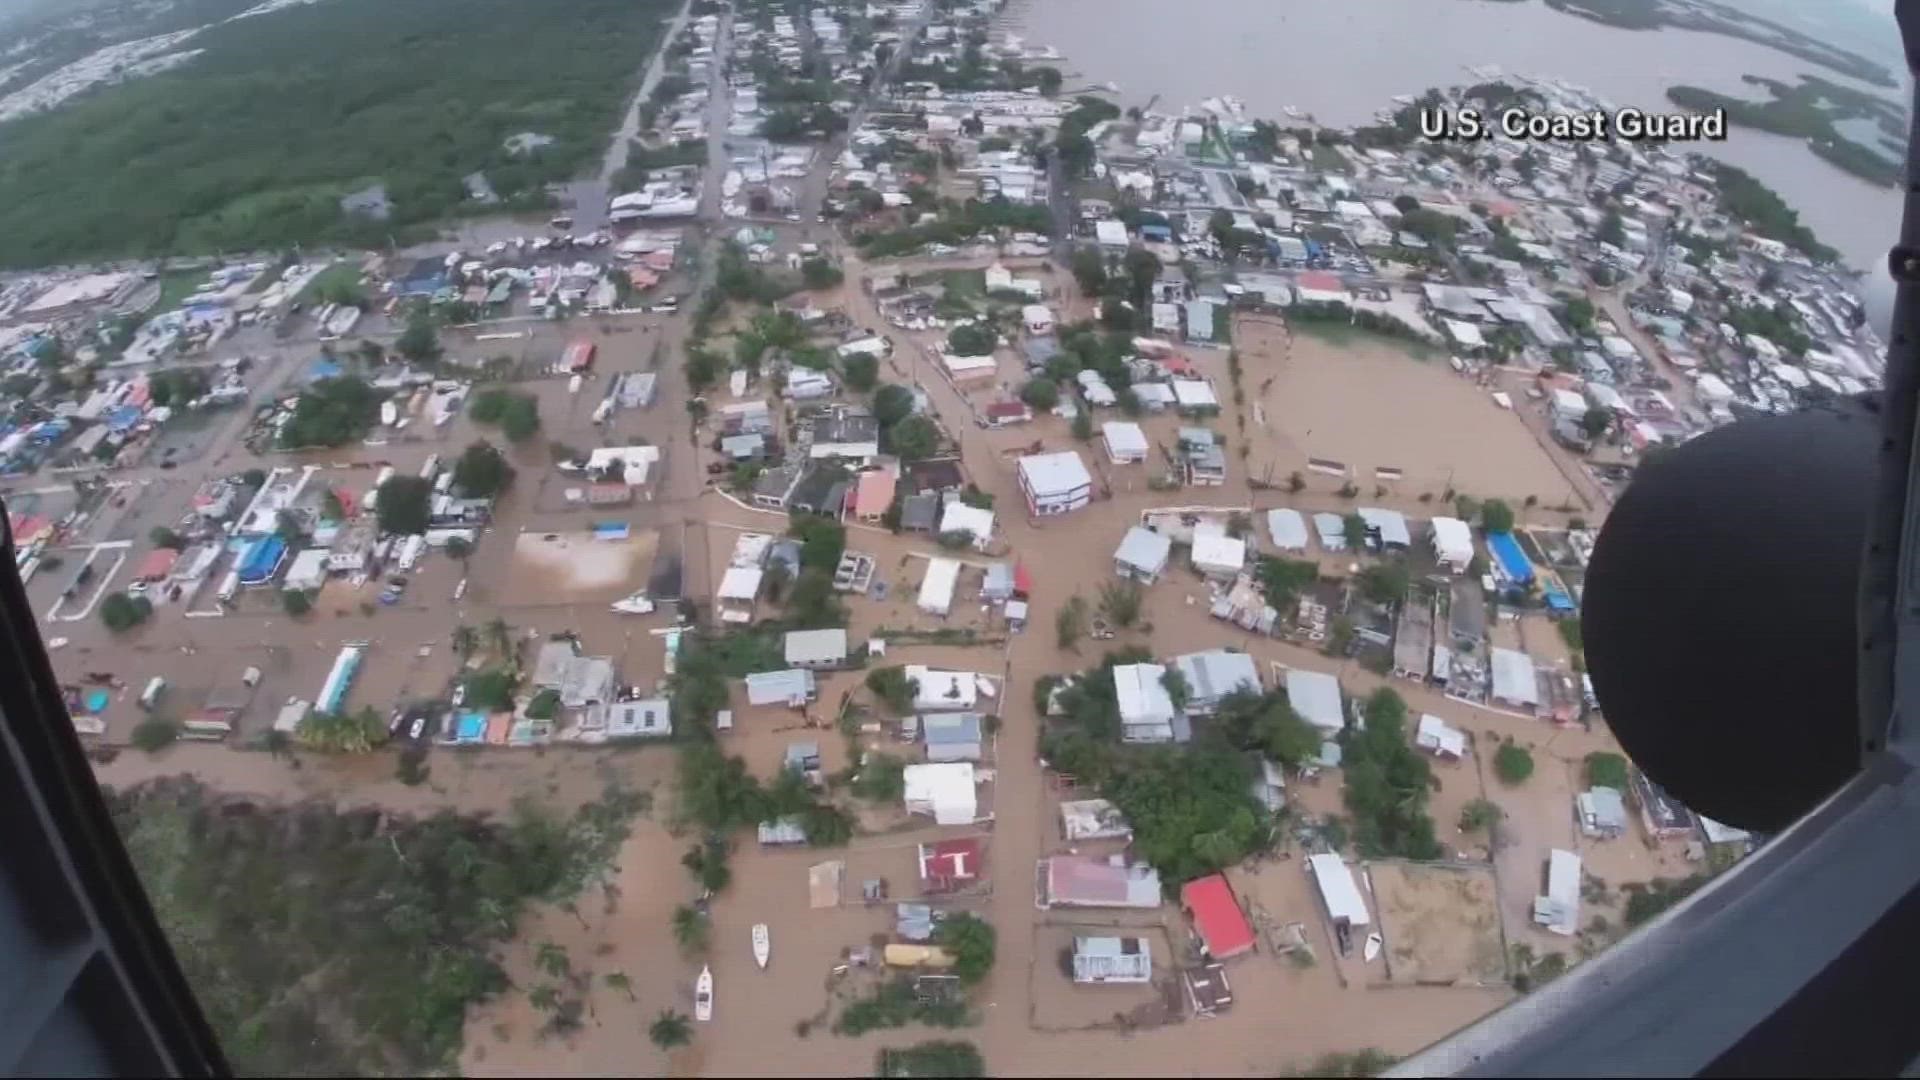 This is a look at Puerto Rico, aerial video from US Coast Guard.